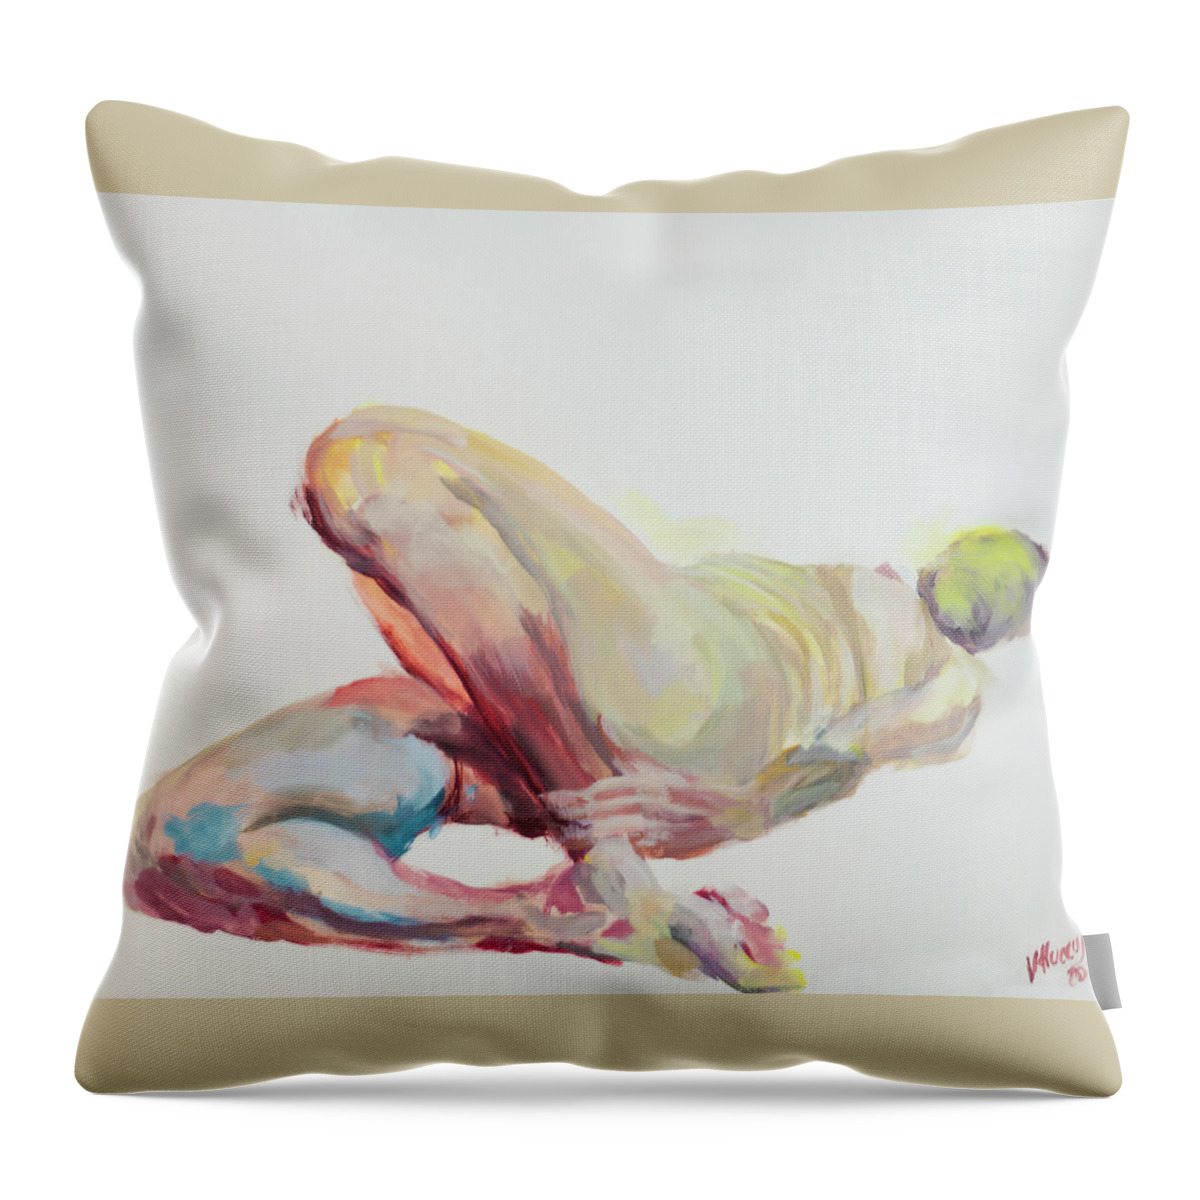 #woman Throw Pillow featuring the painting Woman 6 by Veronica Huacuja